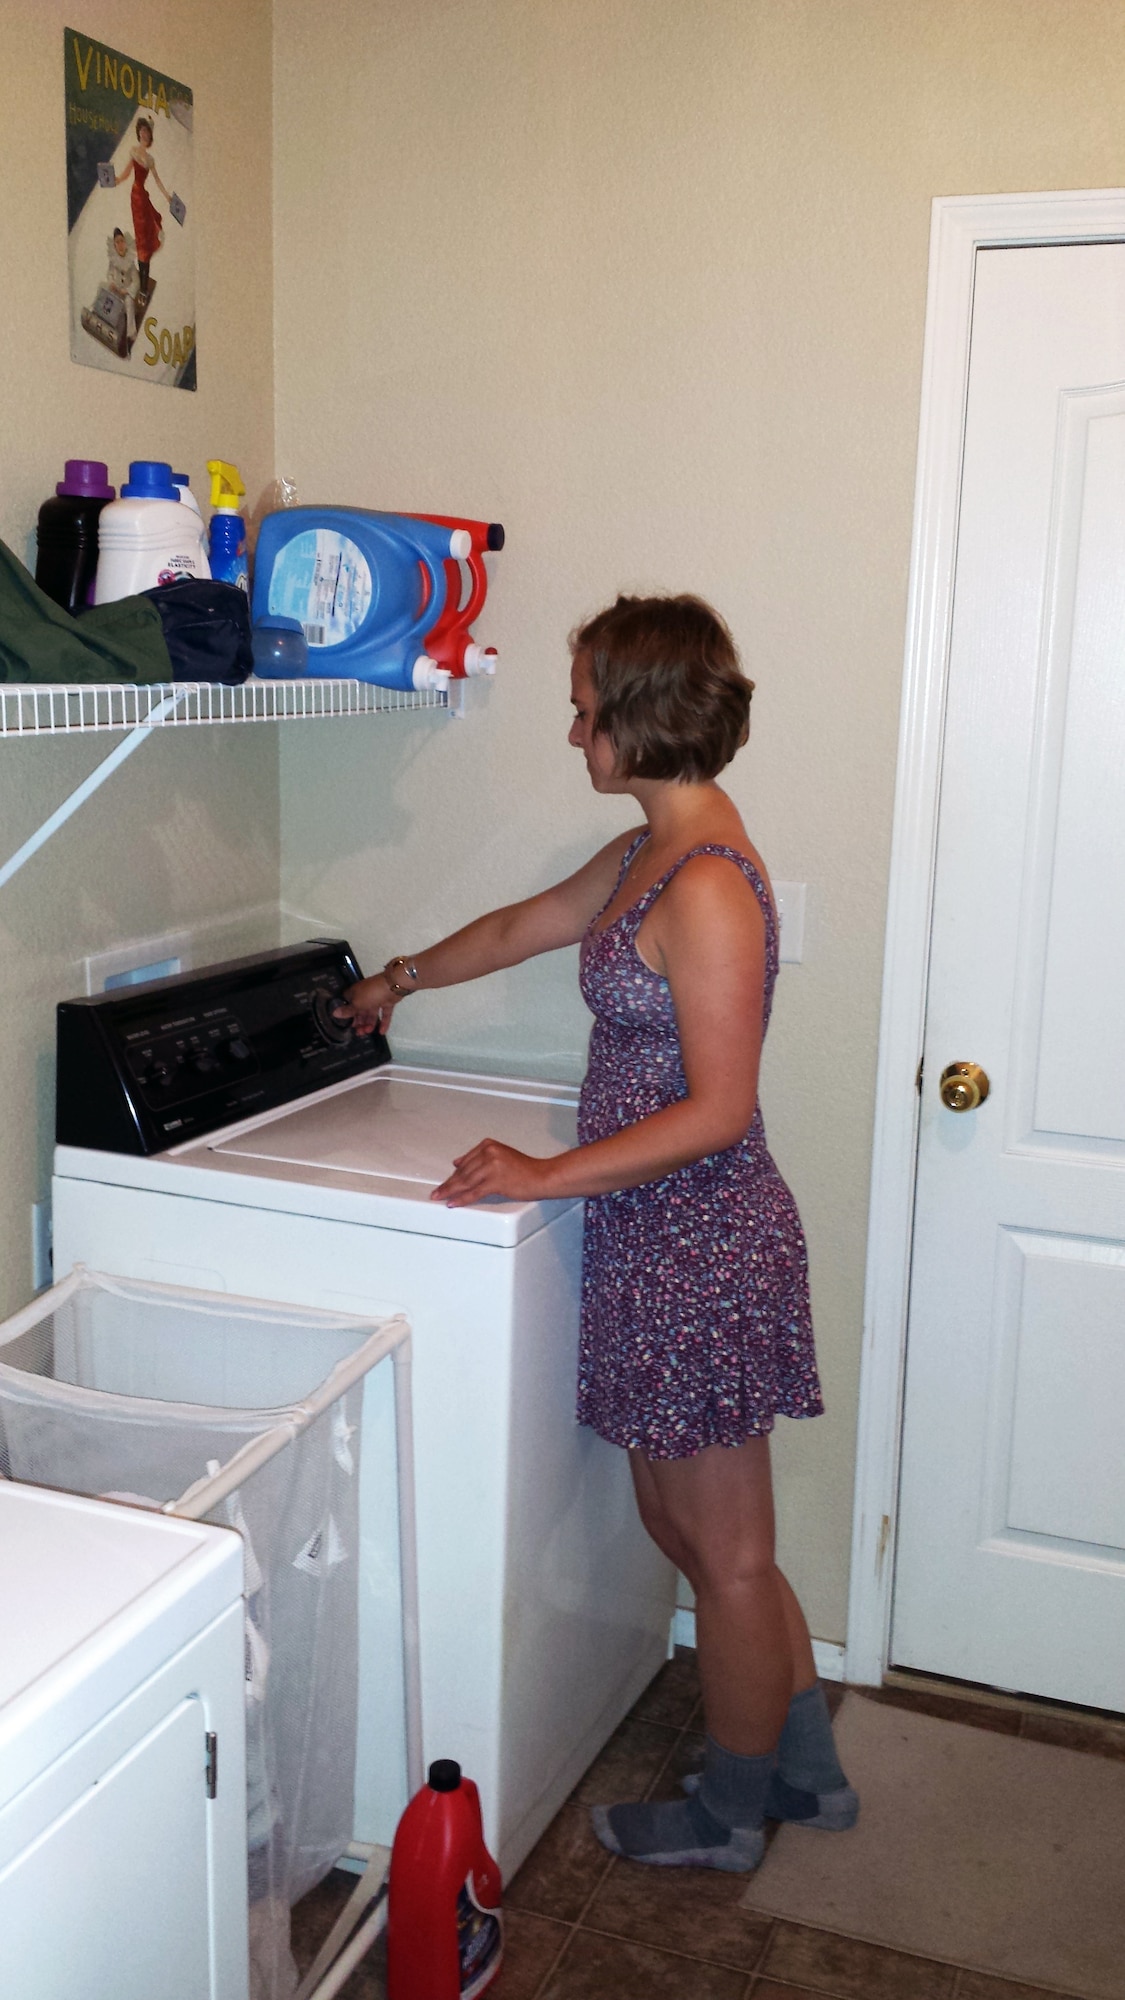 Cadet 3rd Class Jenna Gustafson, does laundry at her sponsor's house July 10, 2015. She is sponsored by Harry and retired master sergeant Tracey Lundy. Sponsor families give cadets a place to do laundry, eat home cooked meals and study in a relaxed environment. (U.S. Air Force photo by Harry Lundy).